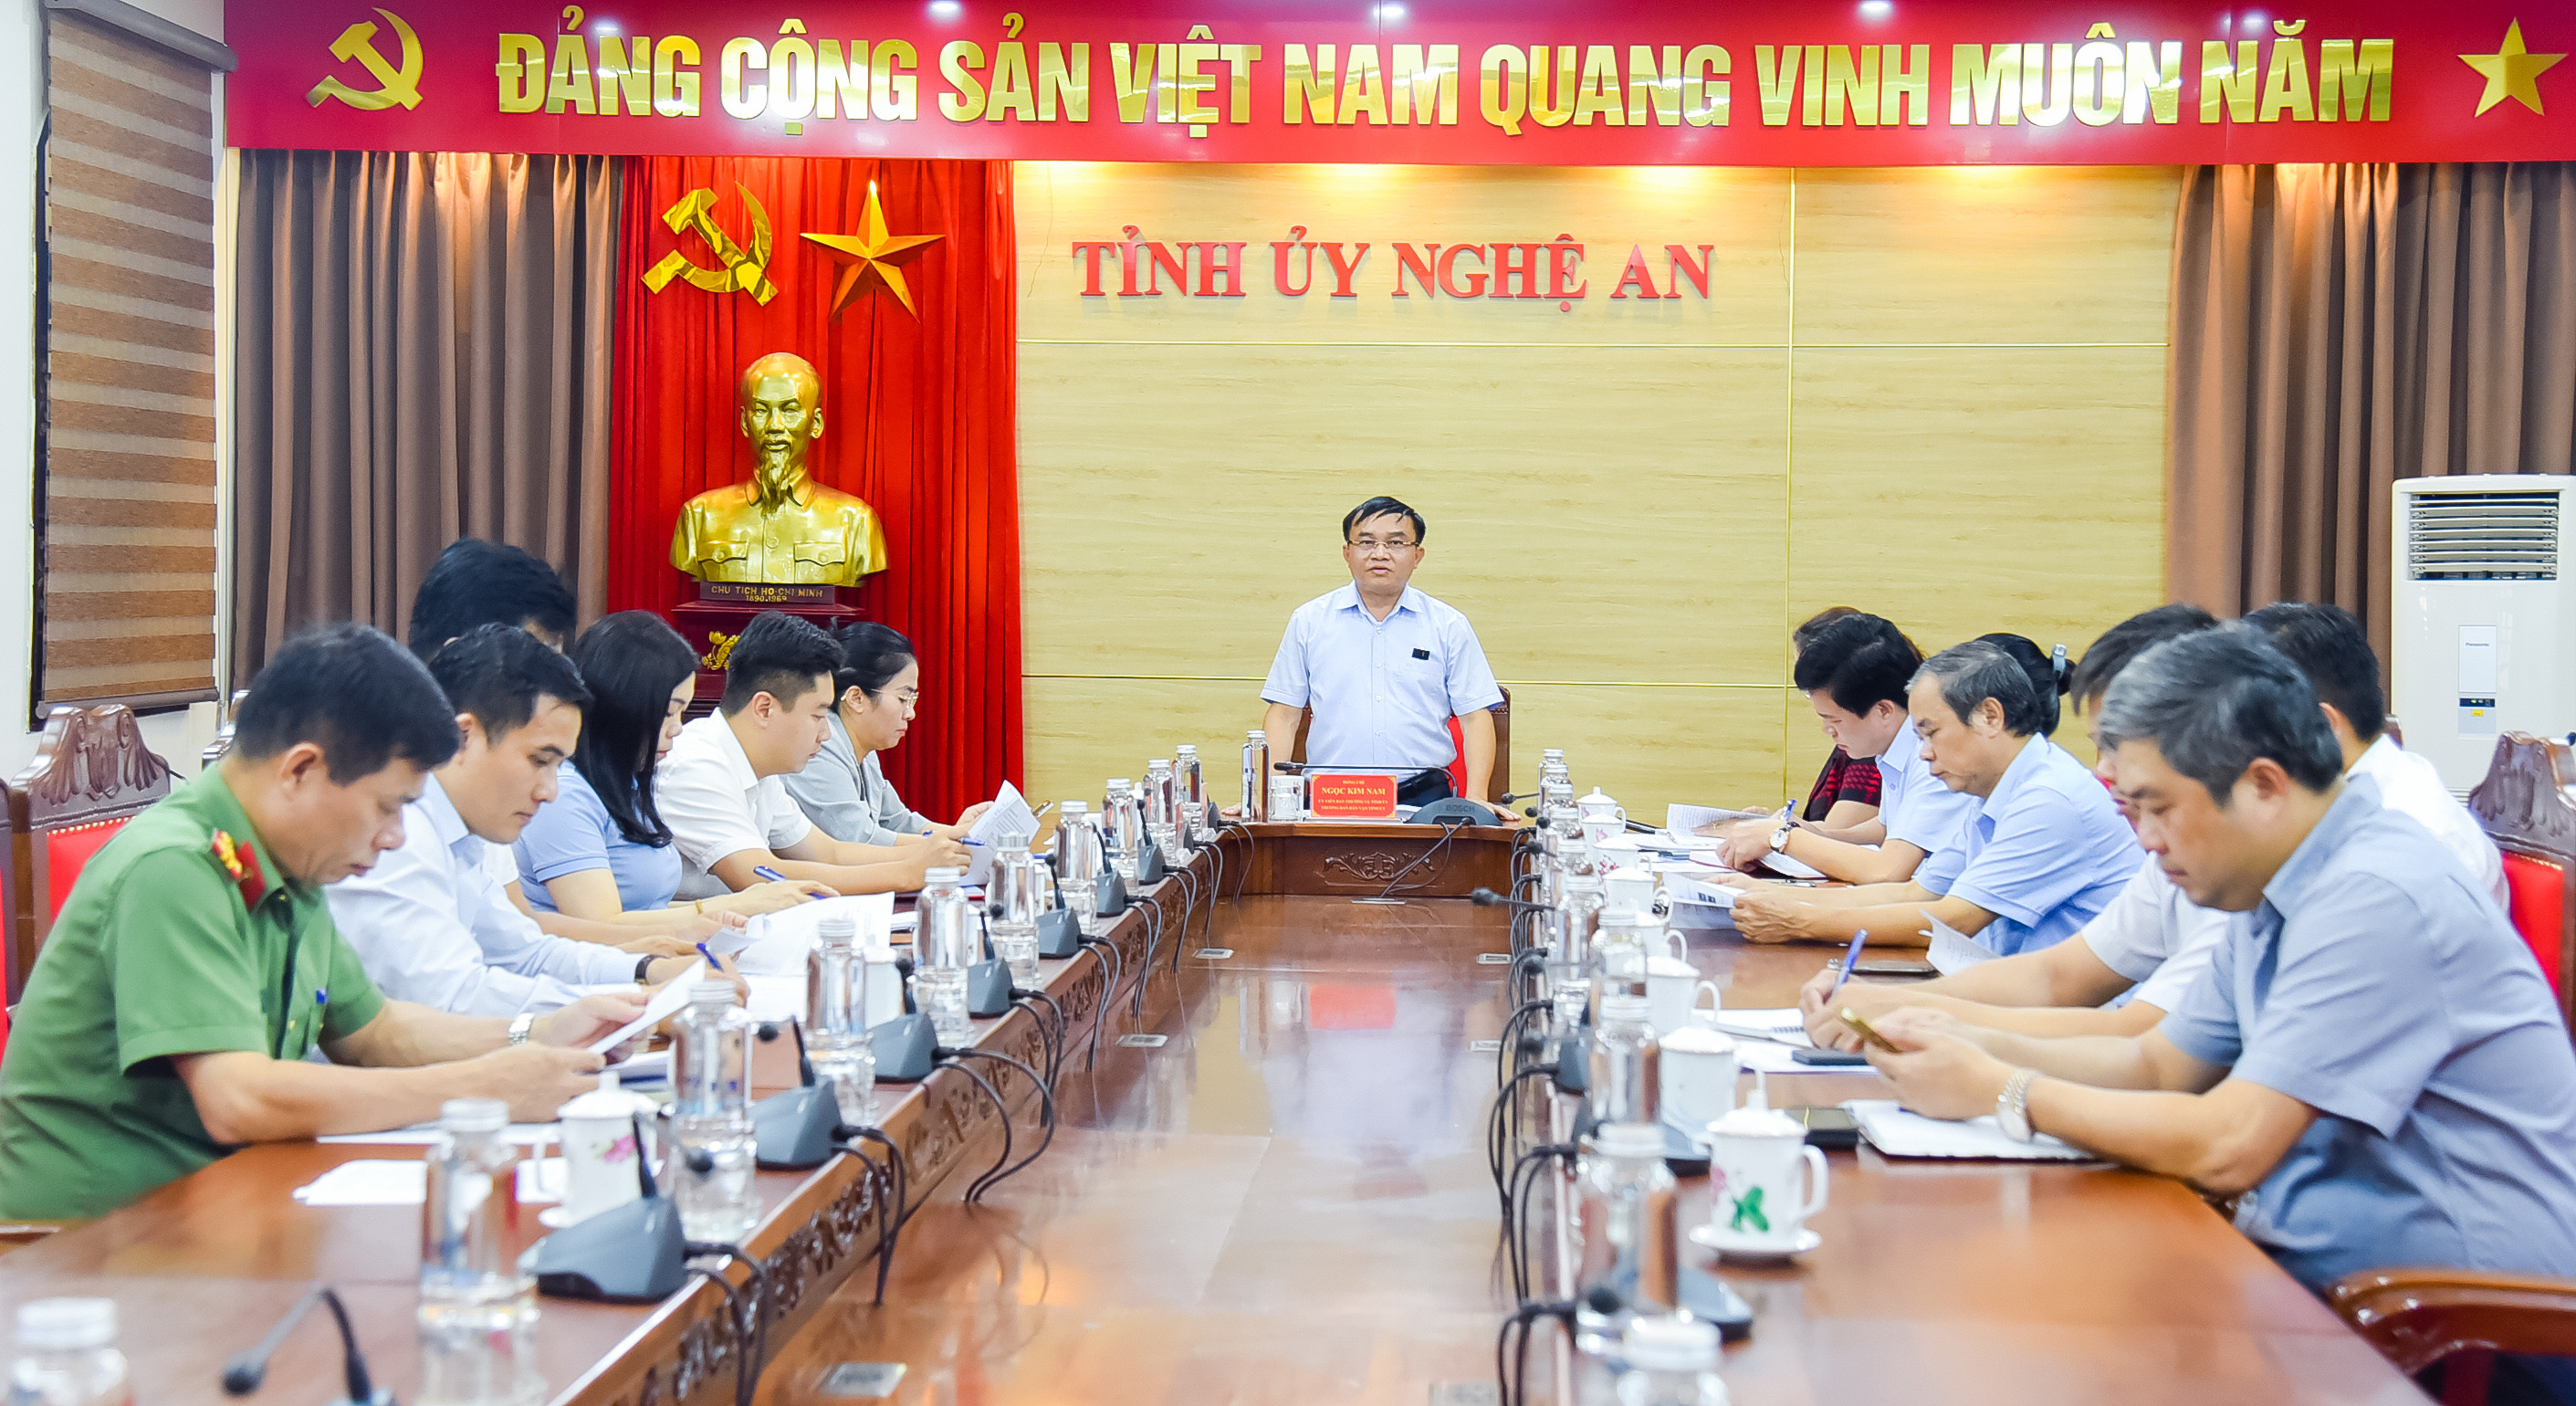 bna_toan canh. anh thanh le.jpg